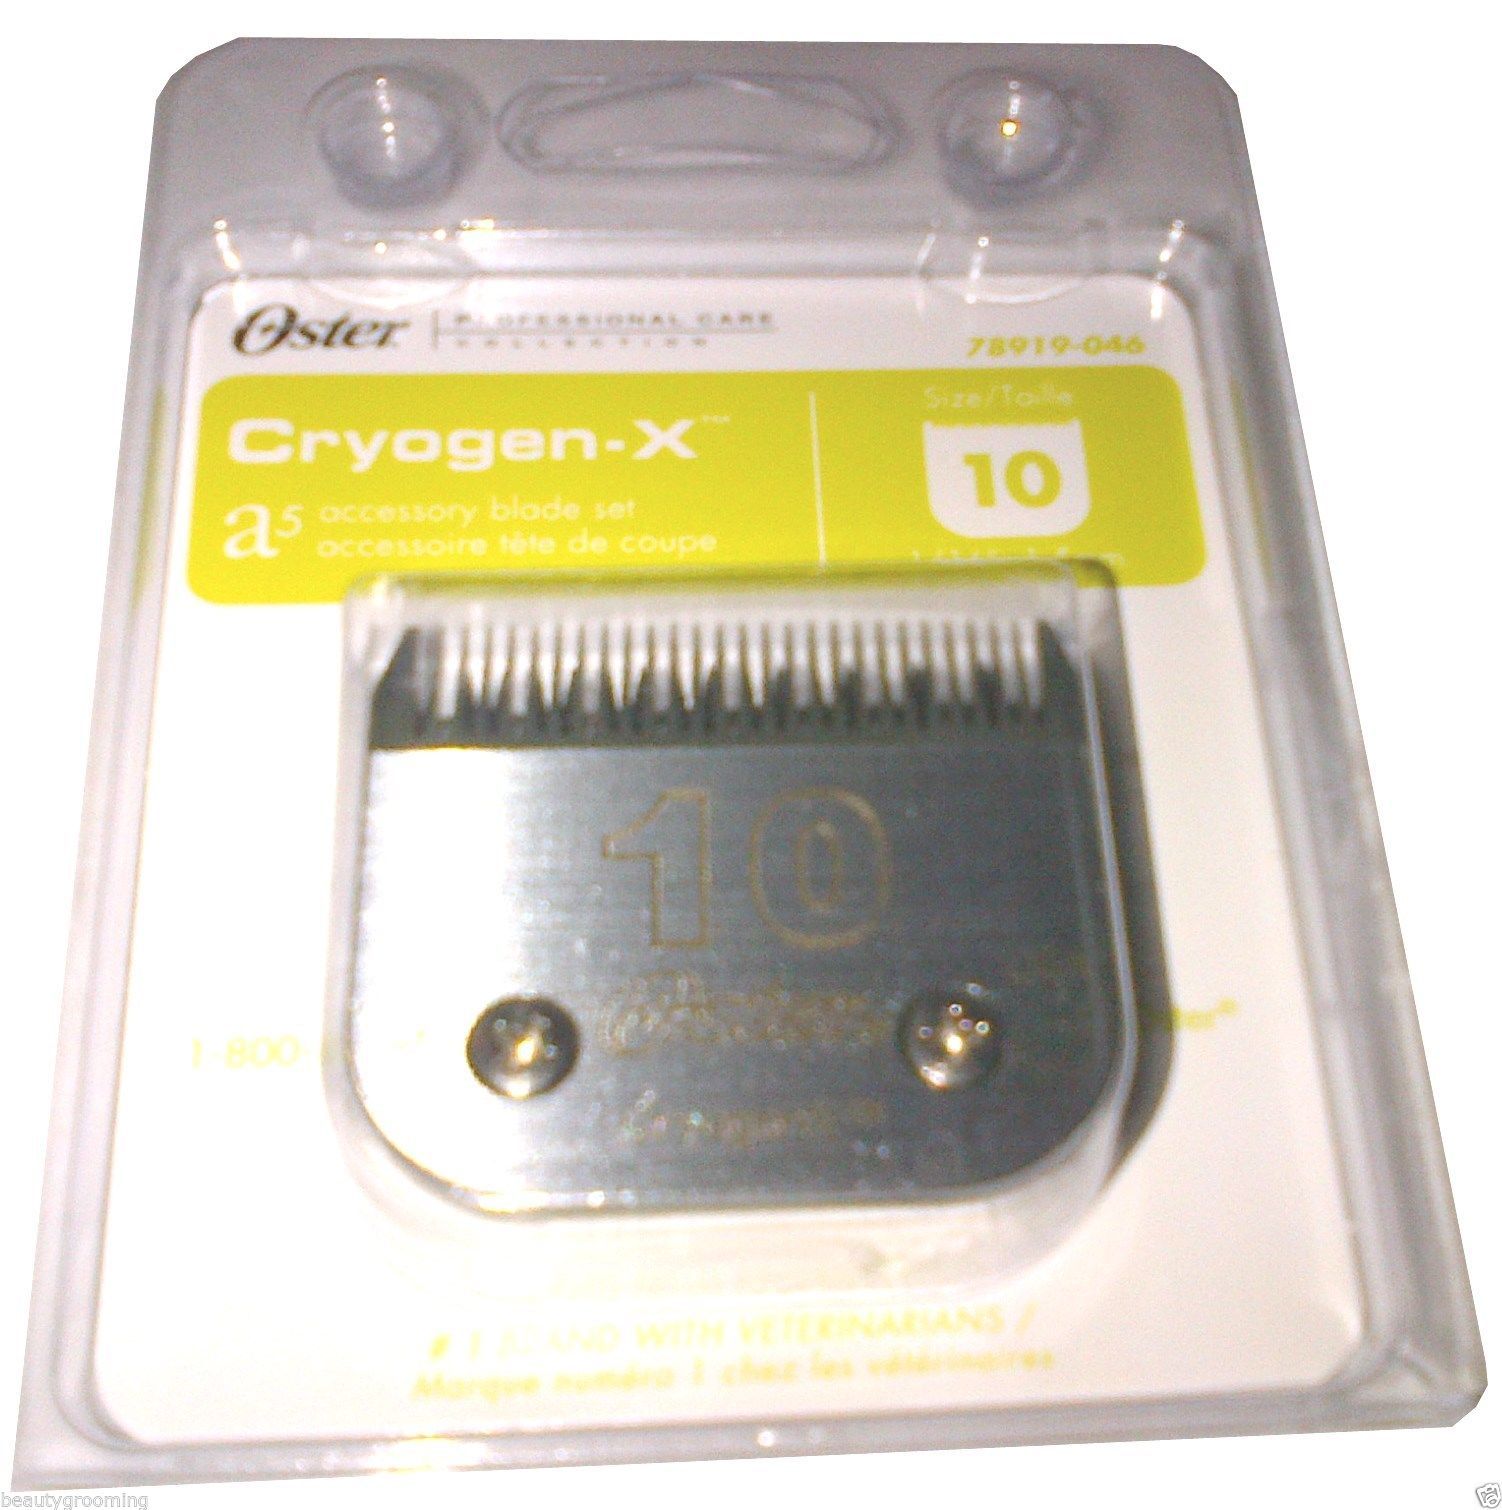 Primary image for Original OSTER Blade Size 10 Cryogen-X 78919-046 Antibacter​ial 1/16" - 1.5mm